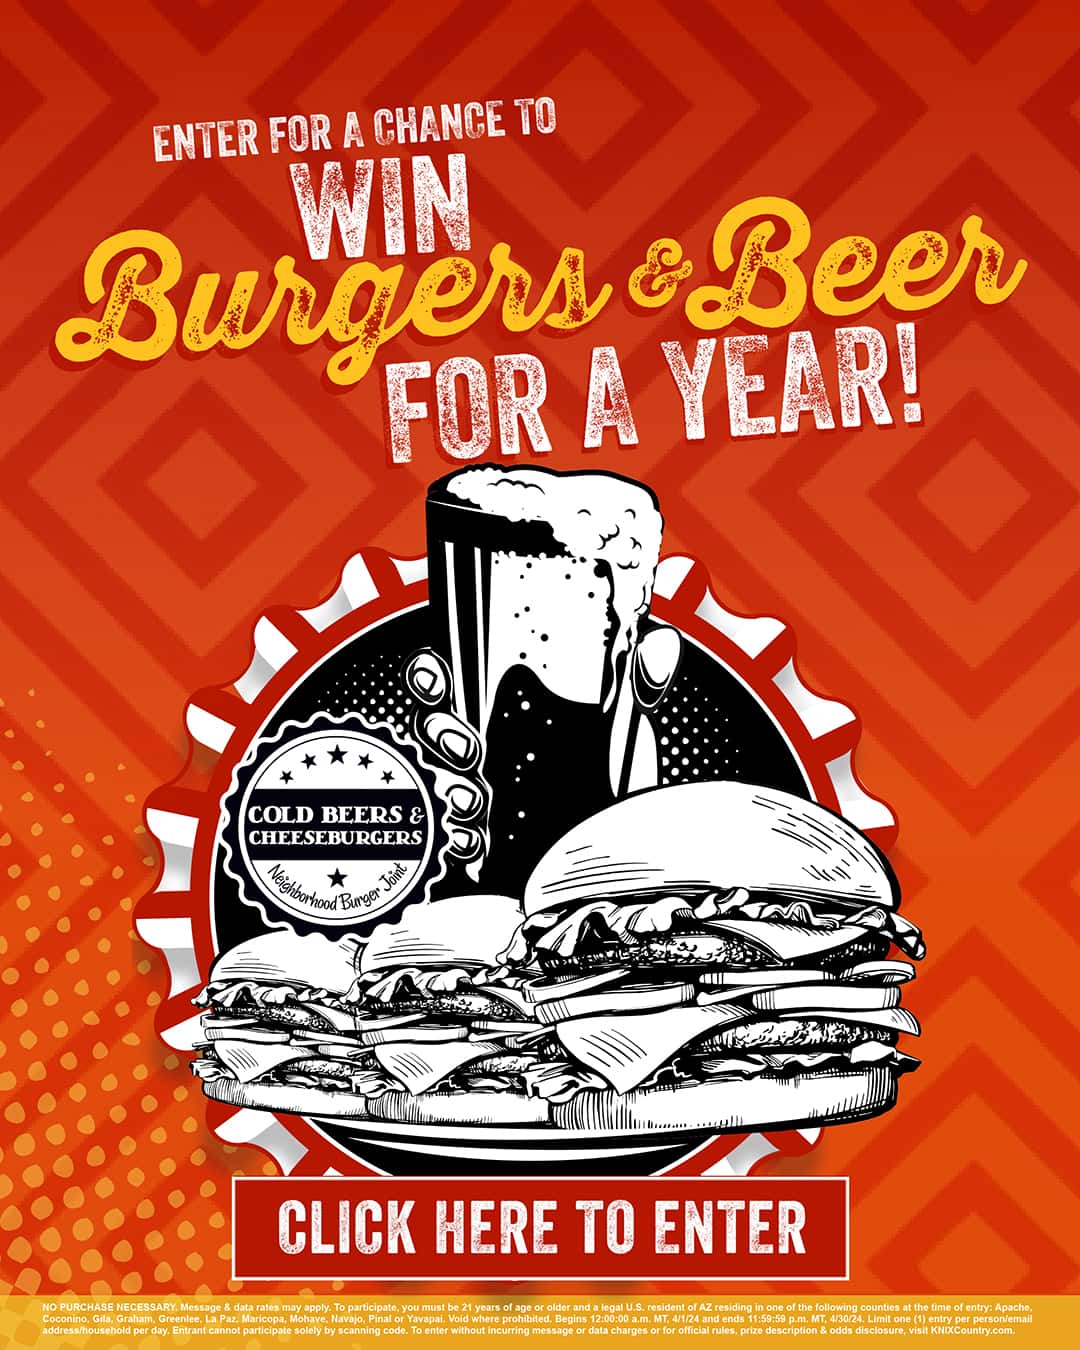 Win Burgers & Beer for a Year!